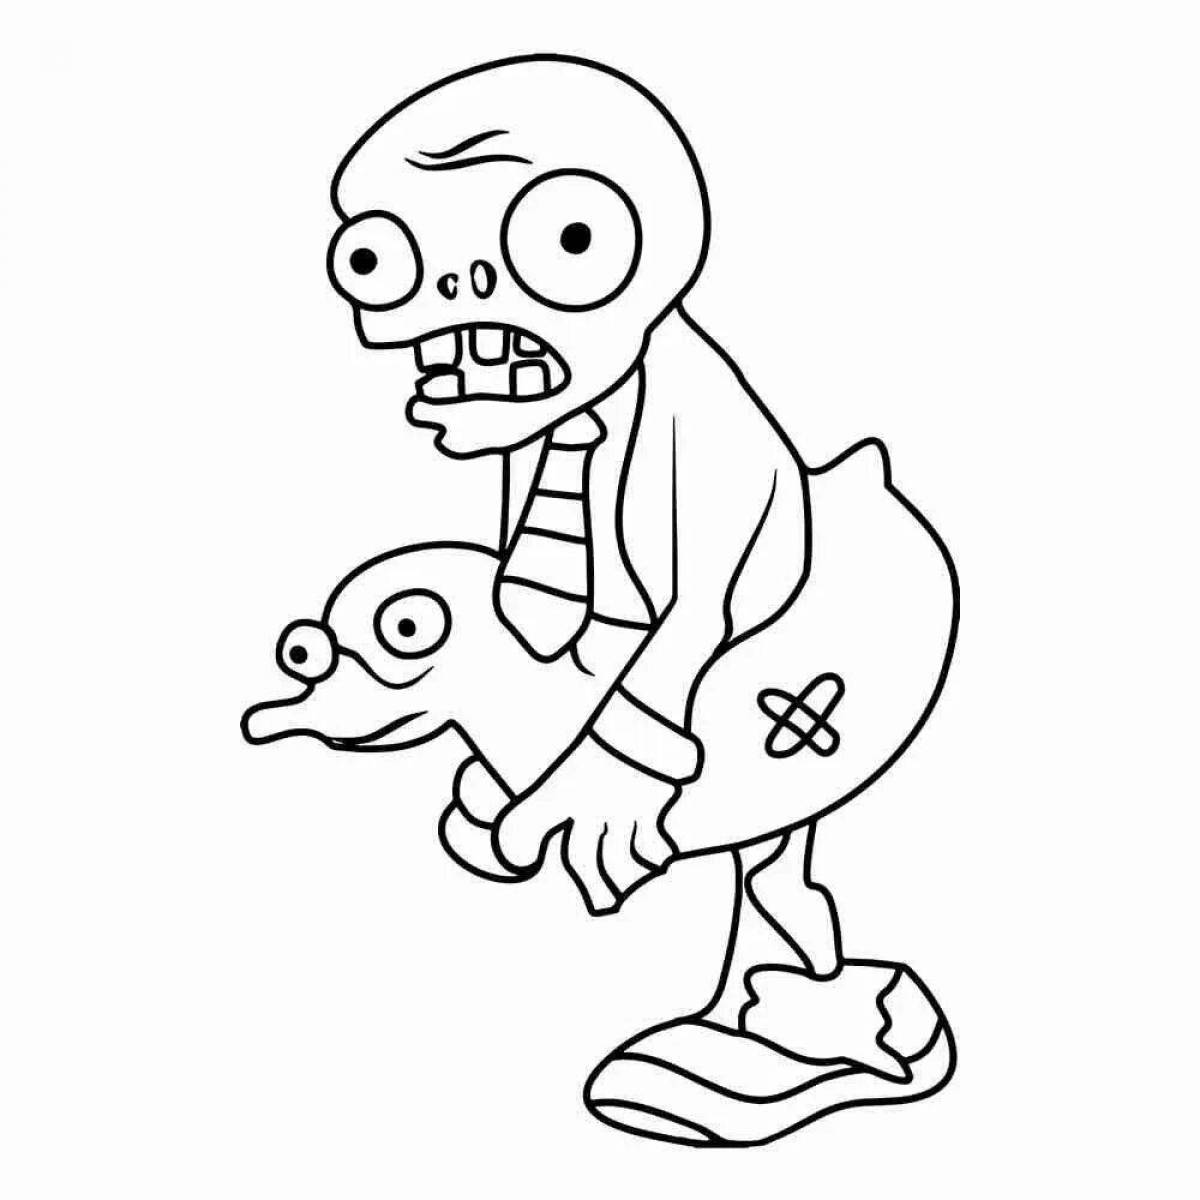 Disturbing zombie coloring pages for kids